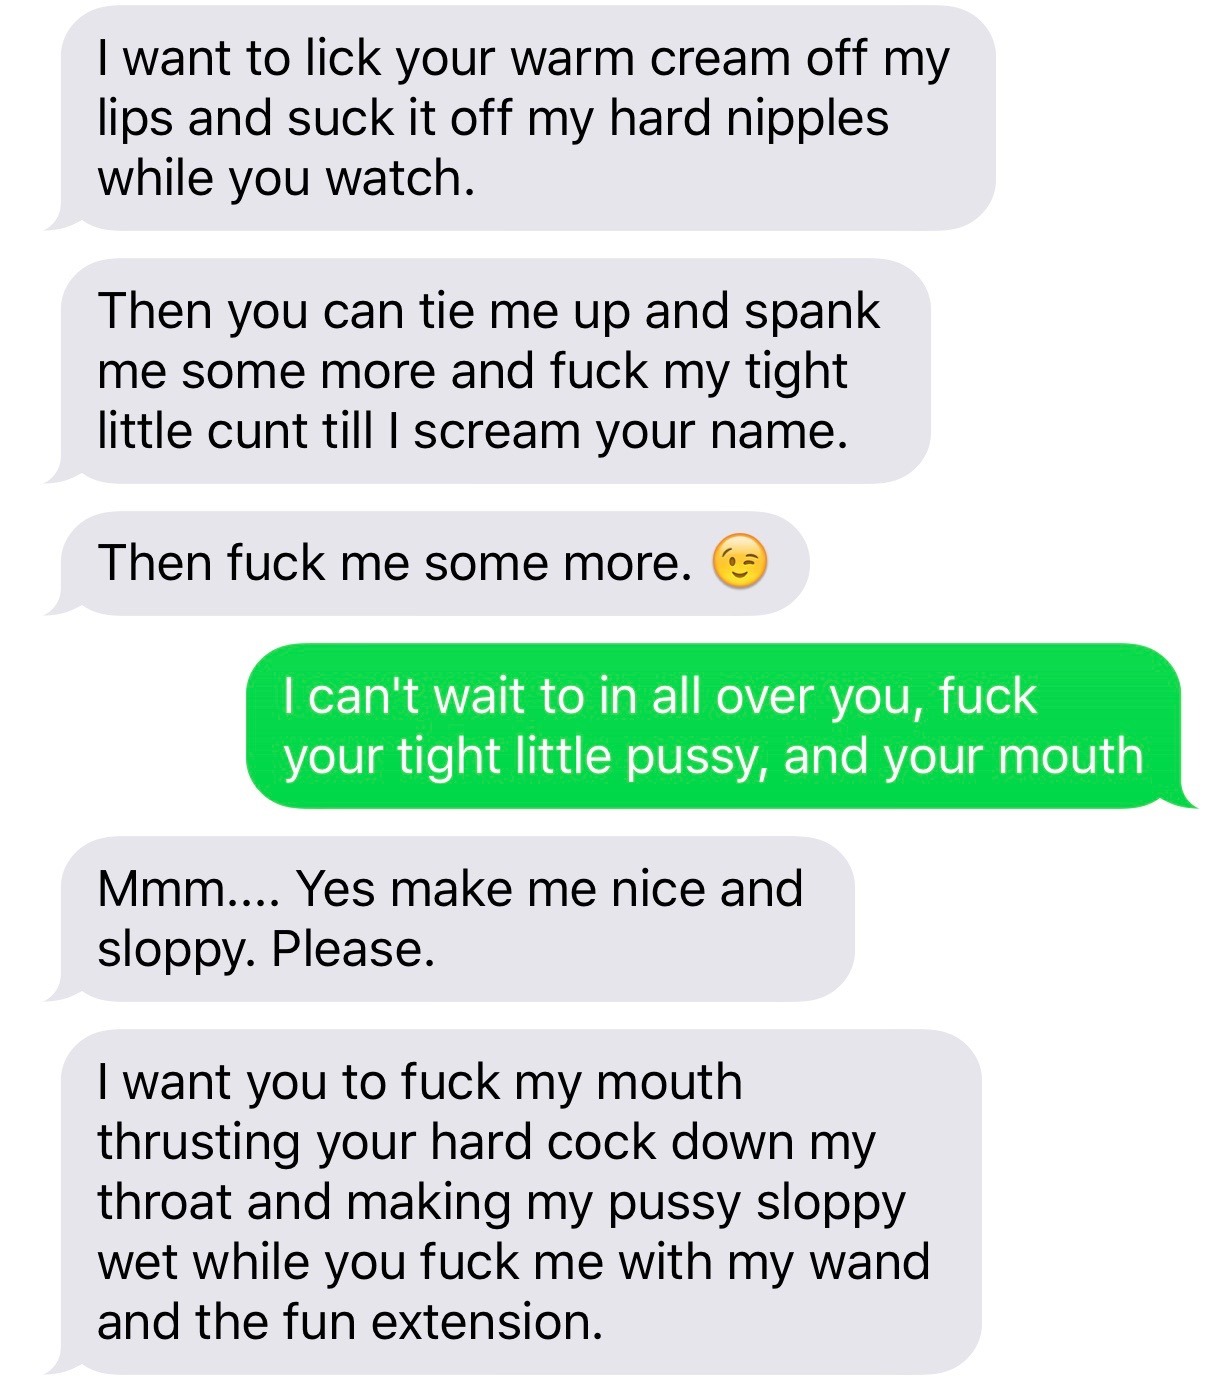 cheating text messages porn nude gallery pic